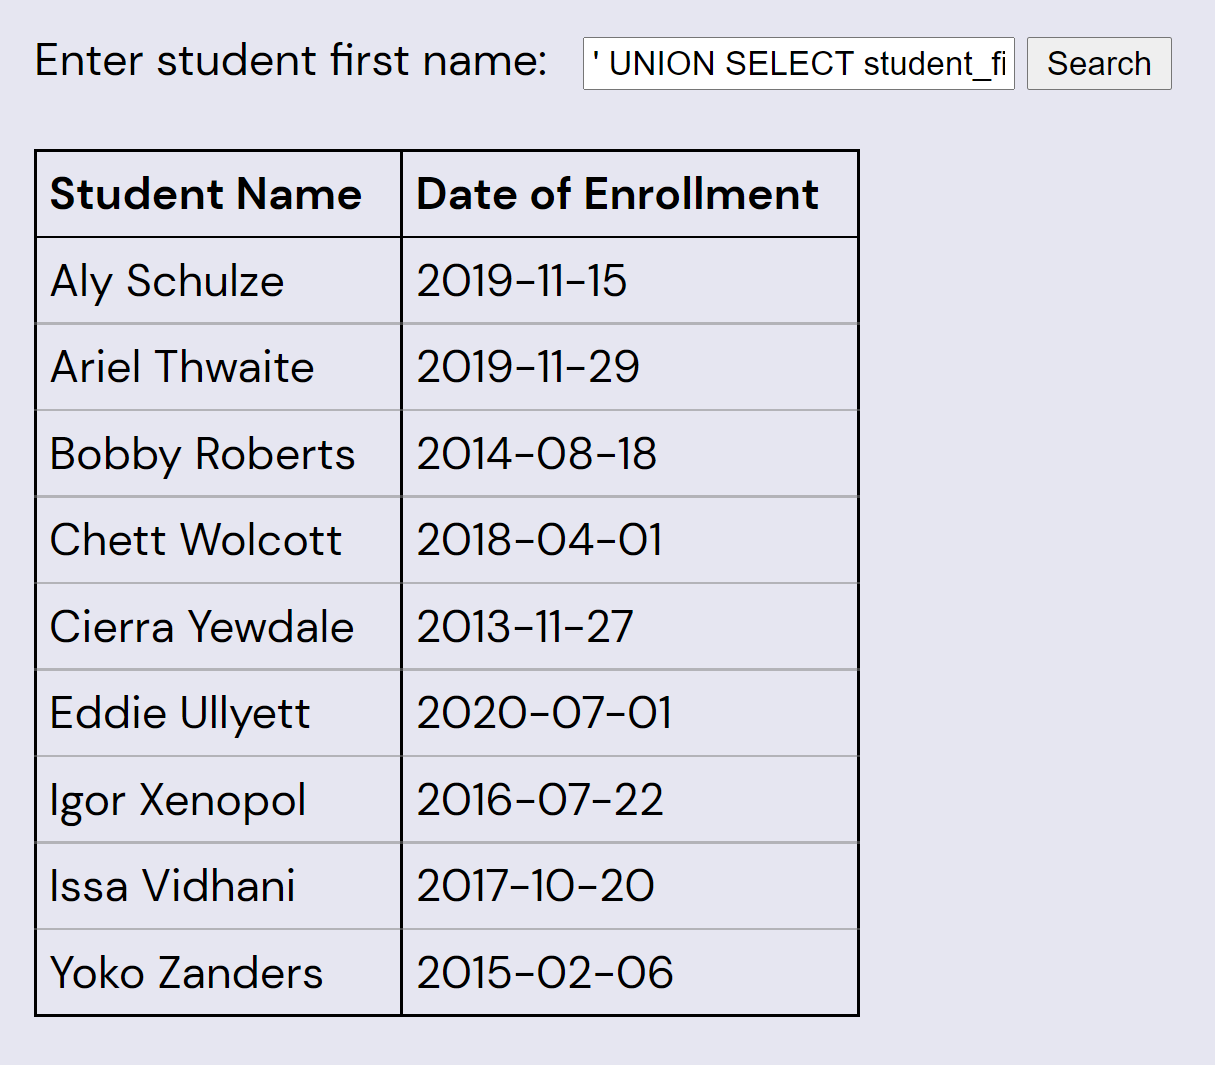 Screenshot showing the names and enrollment dates of students listed in the table below.